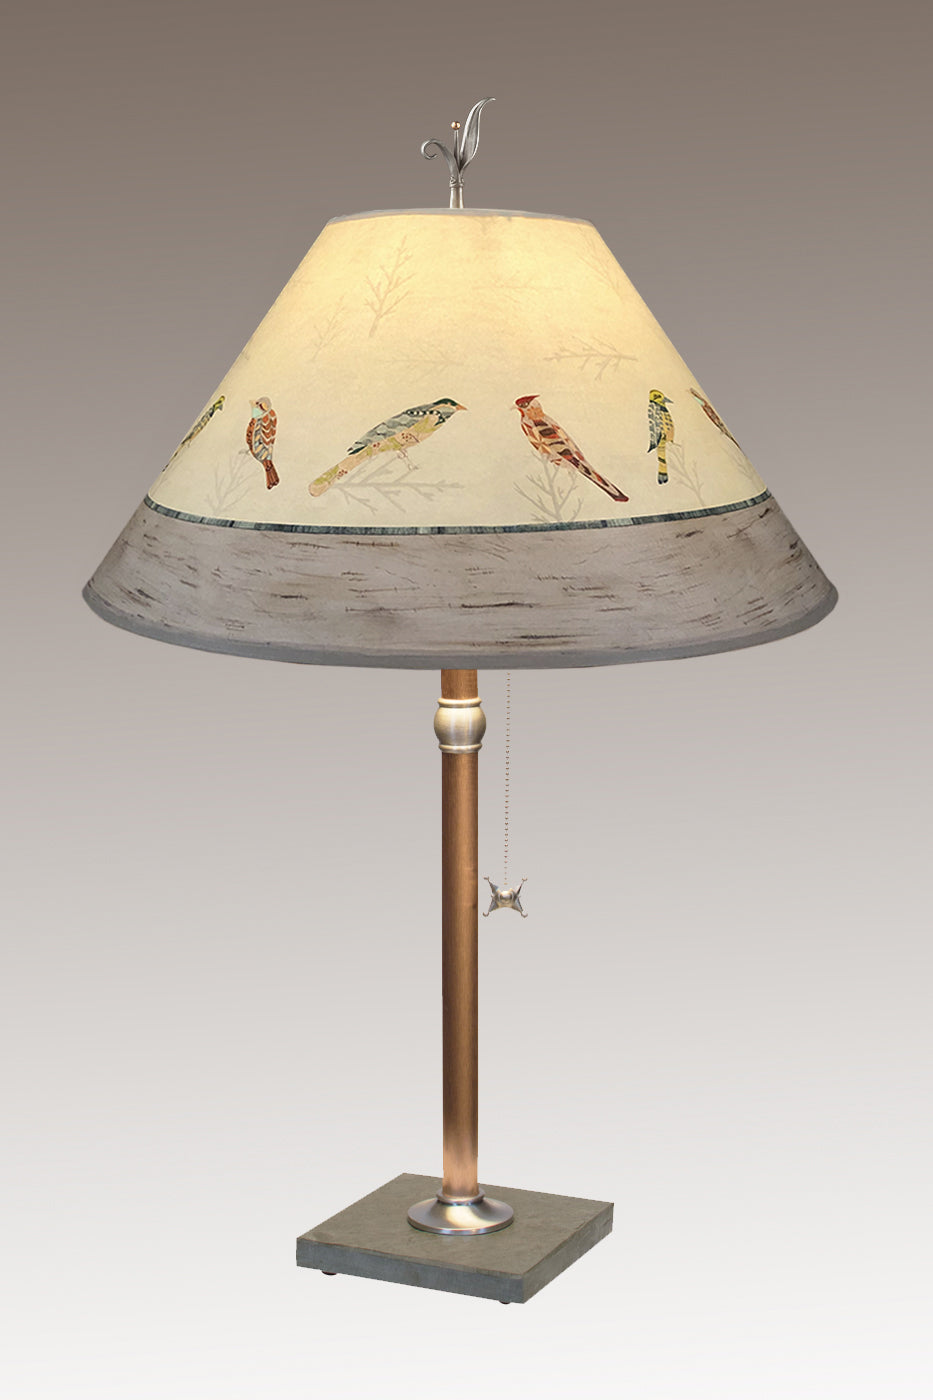 Janna Ugone &amp; Co Table Lamps Copper Table Lamp with Large Conical Shade in Bird Friends